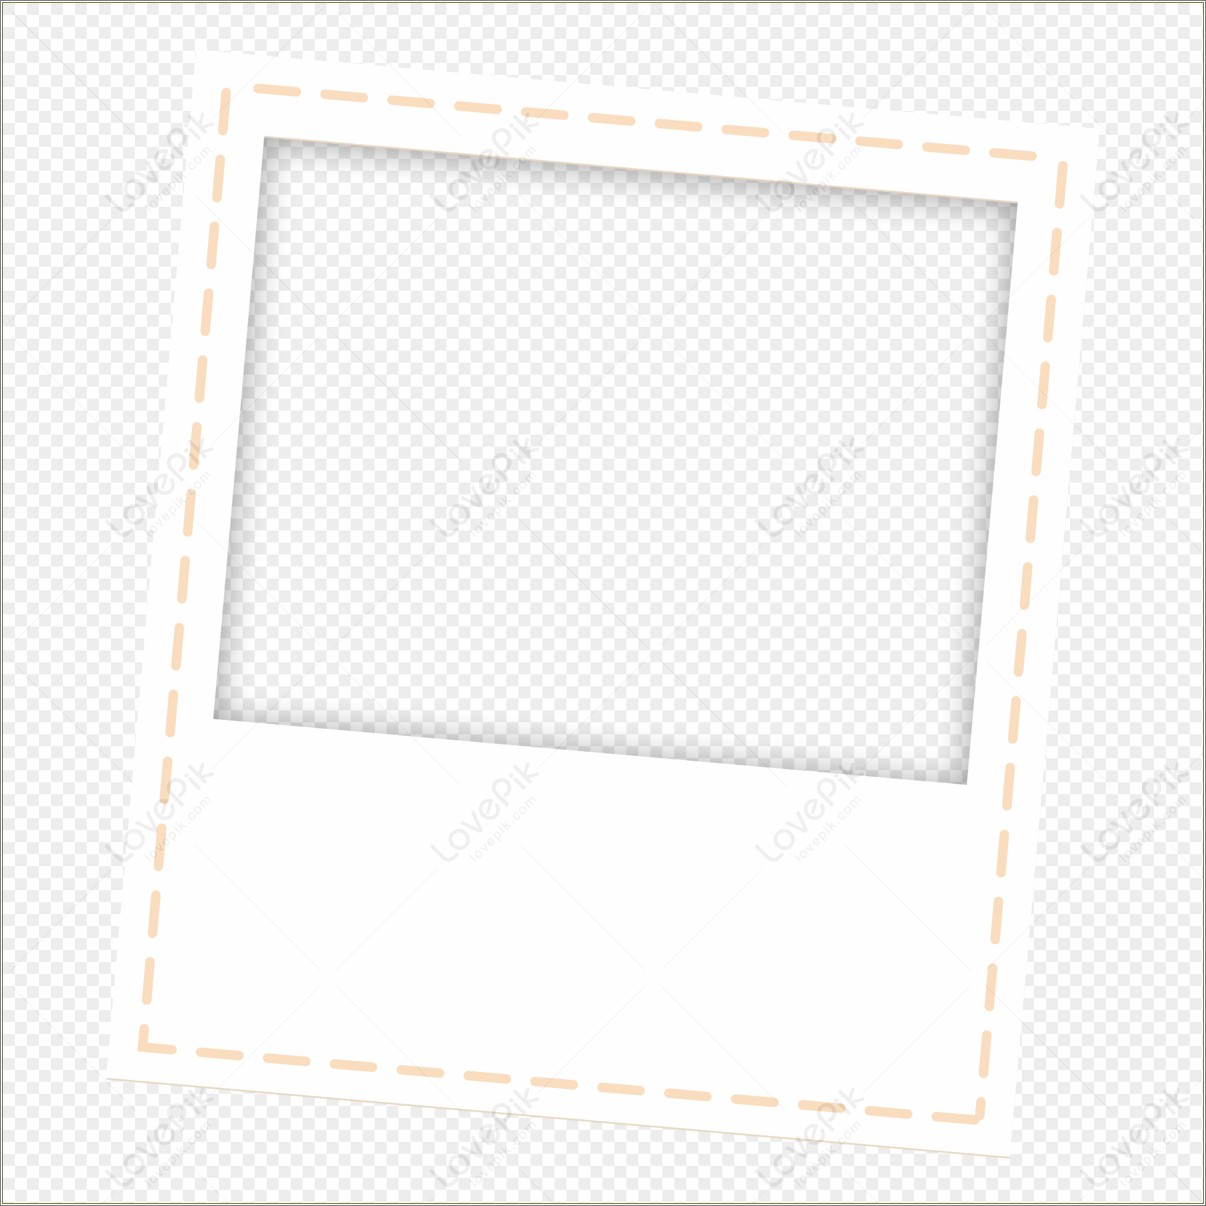 Frame Templates For Photoshop Free Download